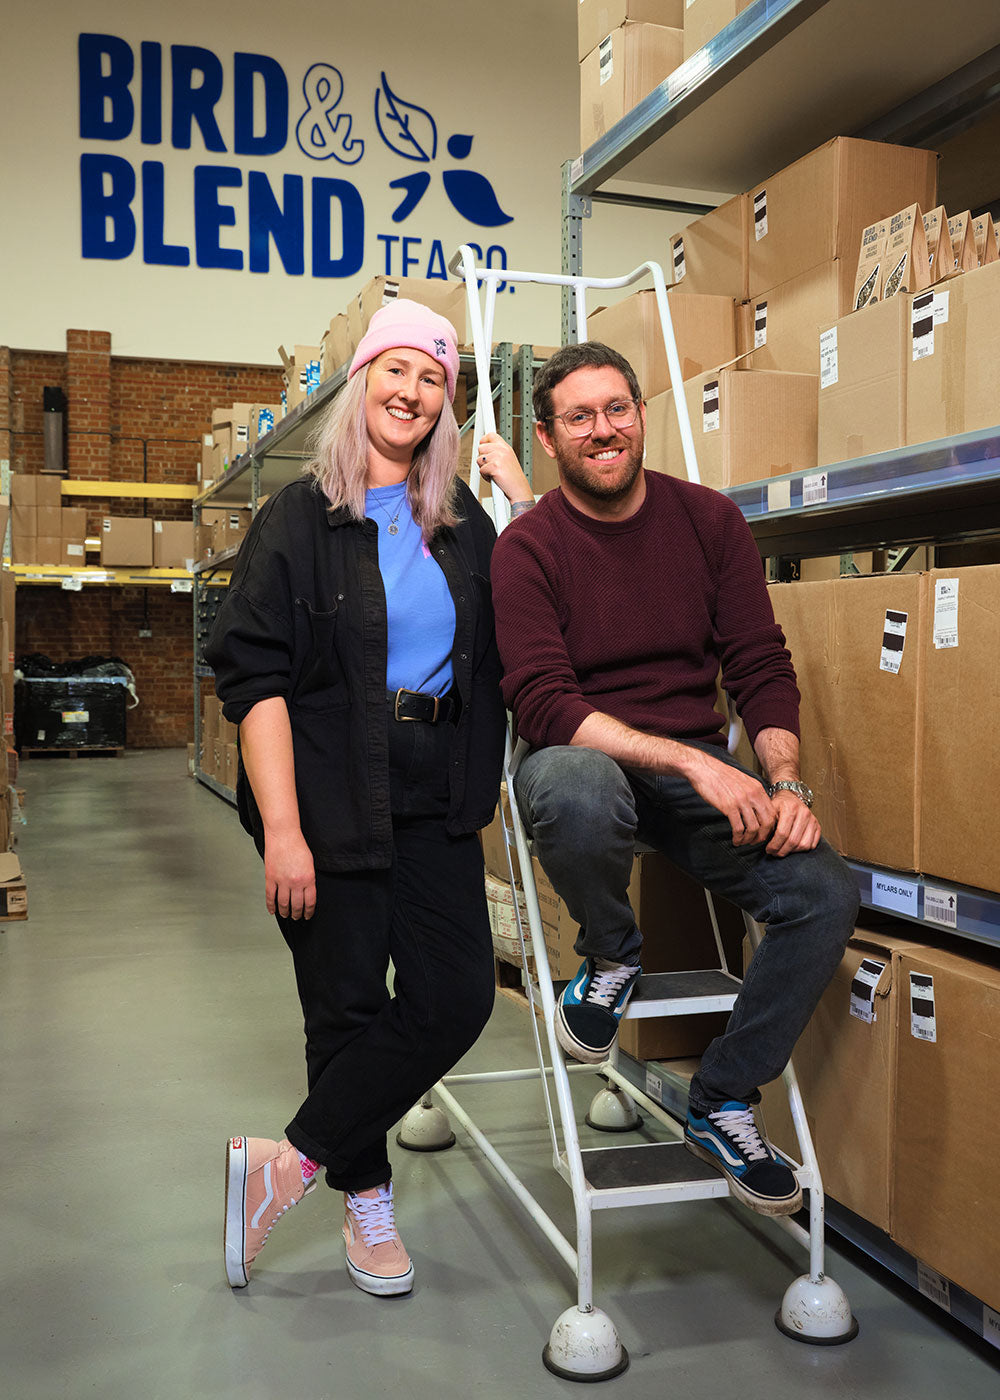 Krisi and Mike Bird & Blend Tea Co founders